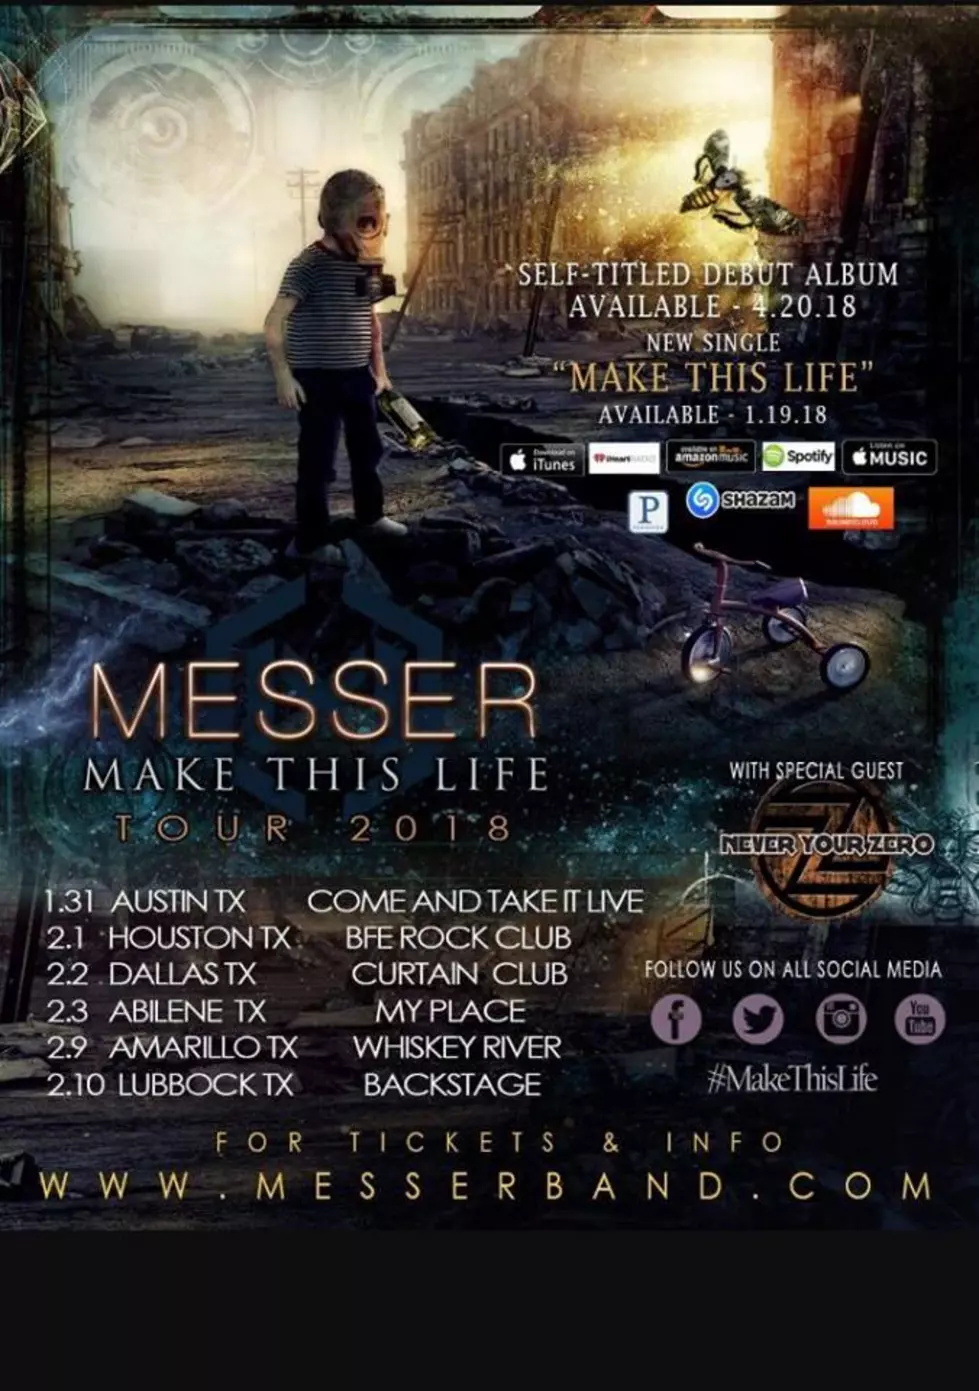 Messer Back At Backstage Lubbock Saturday, February 10